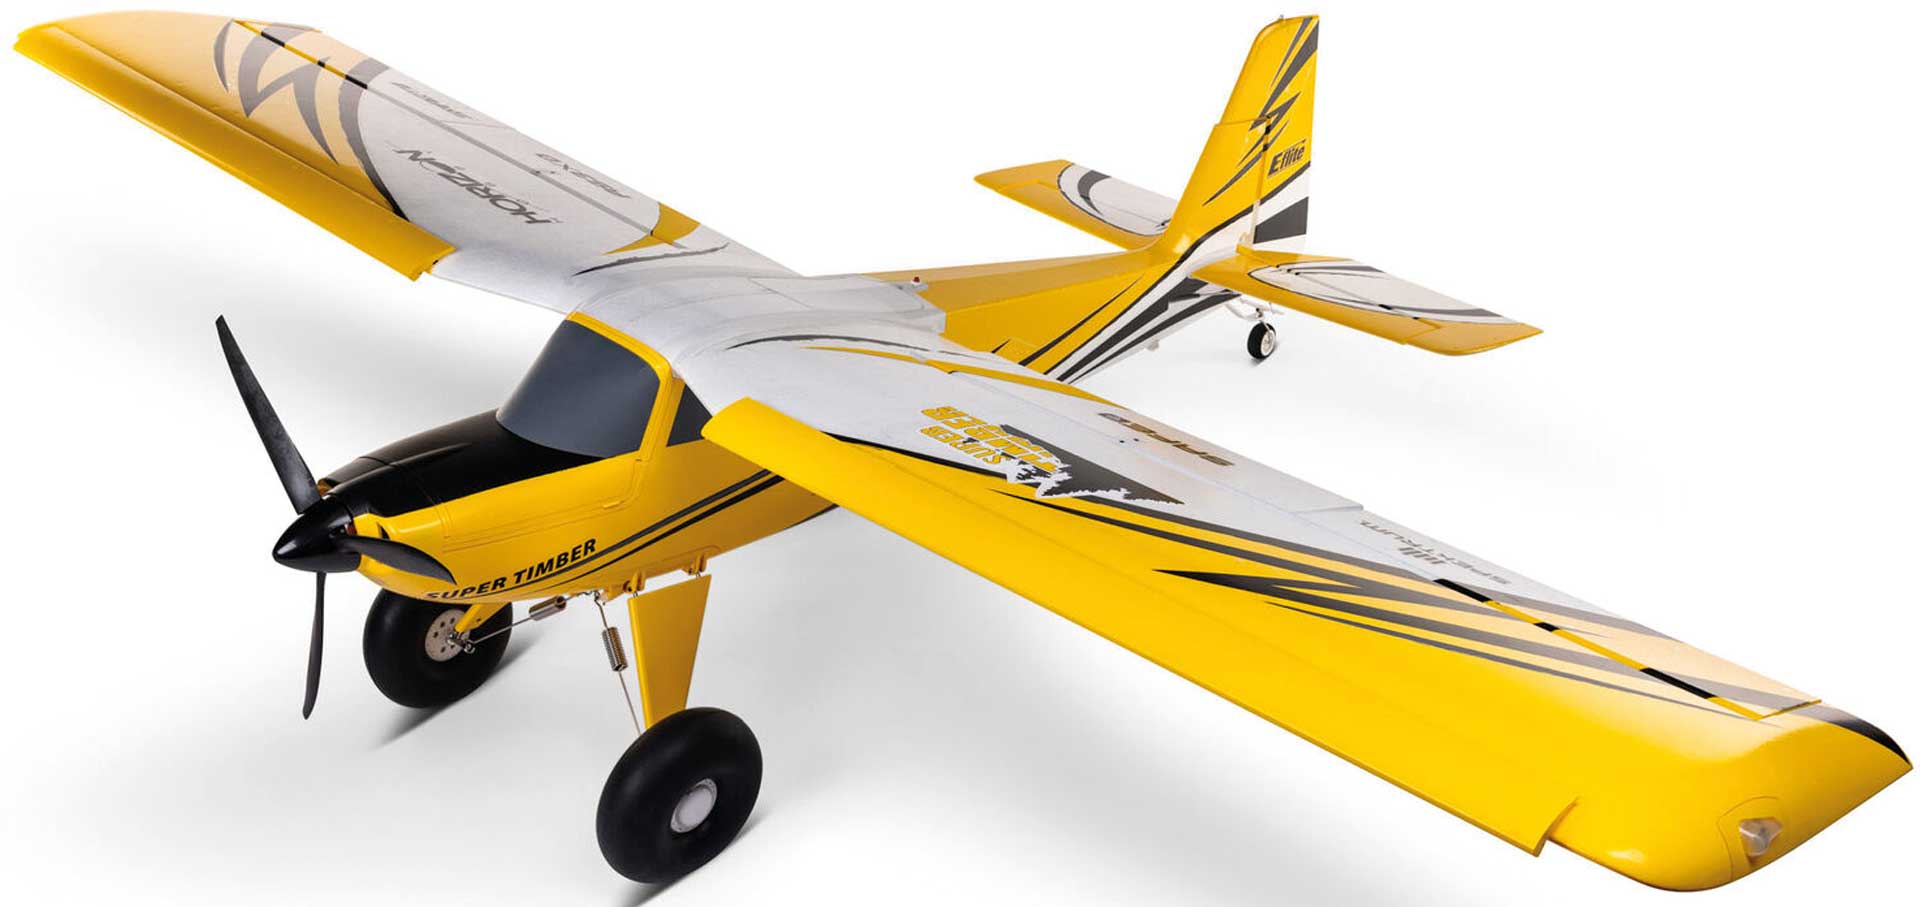 E-FLITE Super Timber 1.7m BNF Basic mit AS3X und SAFE Select